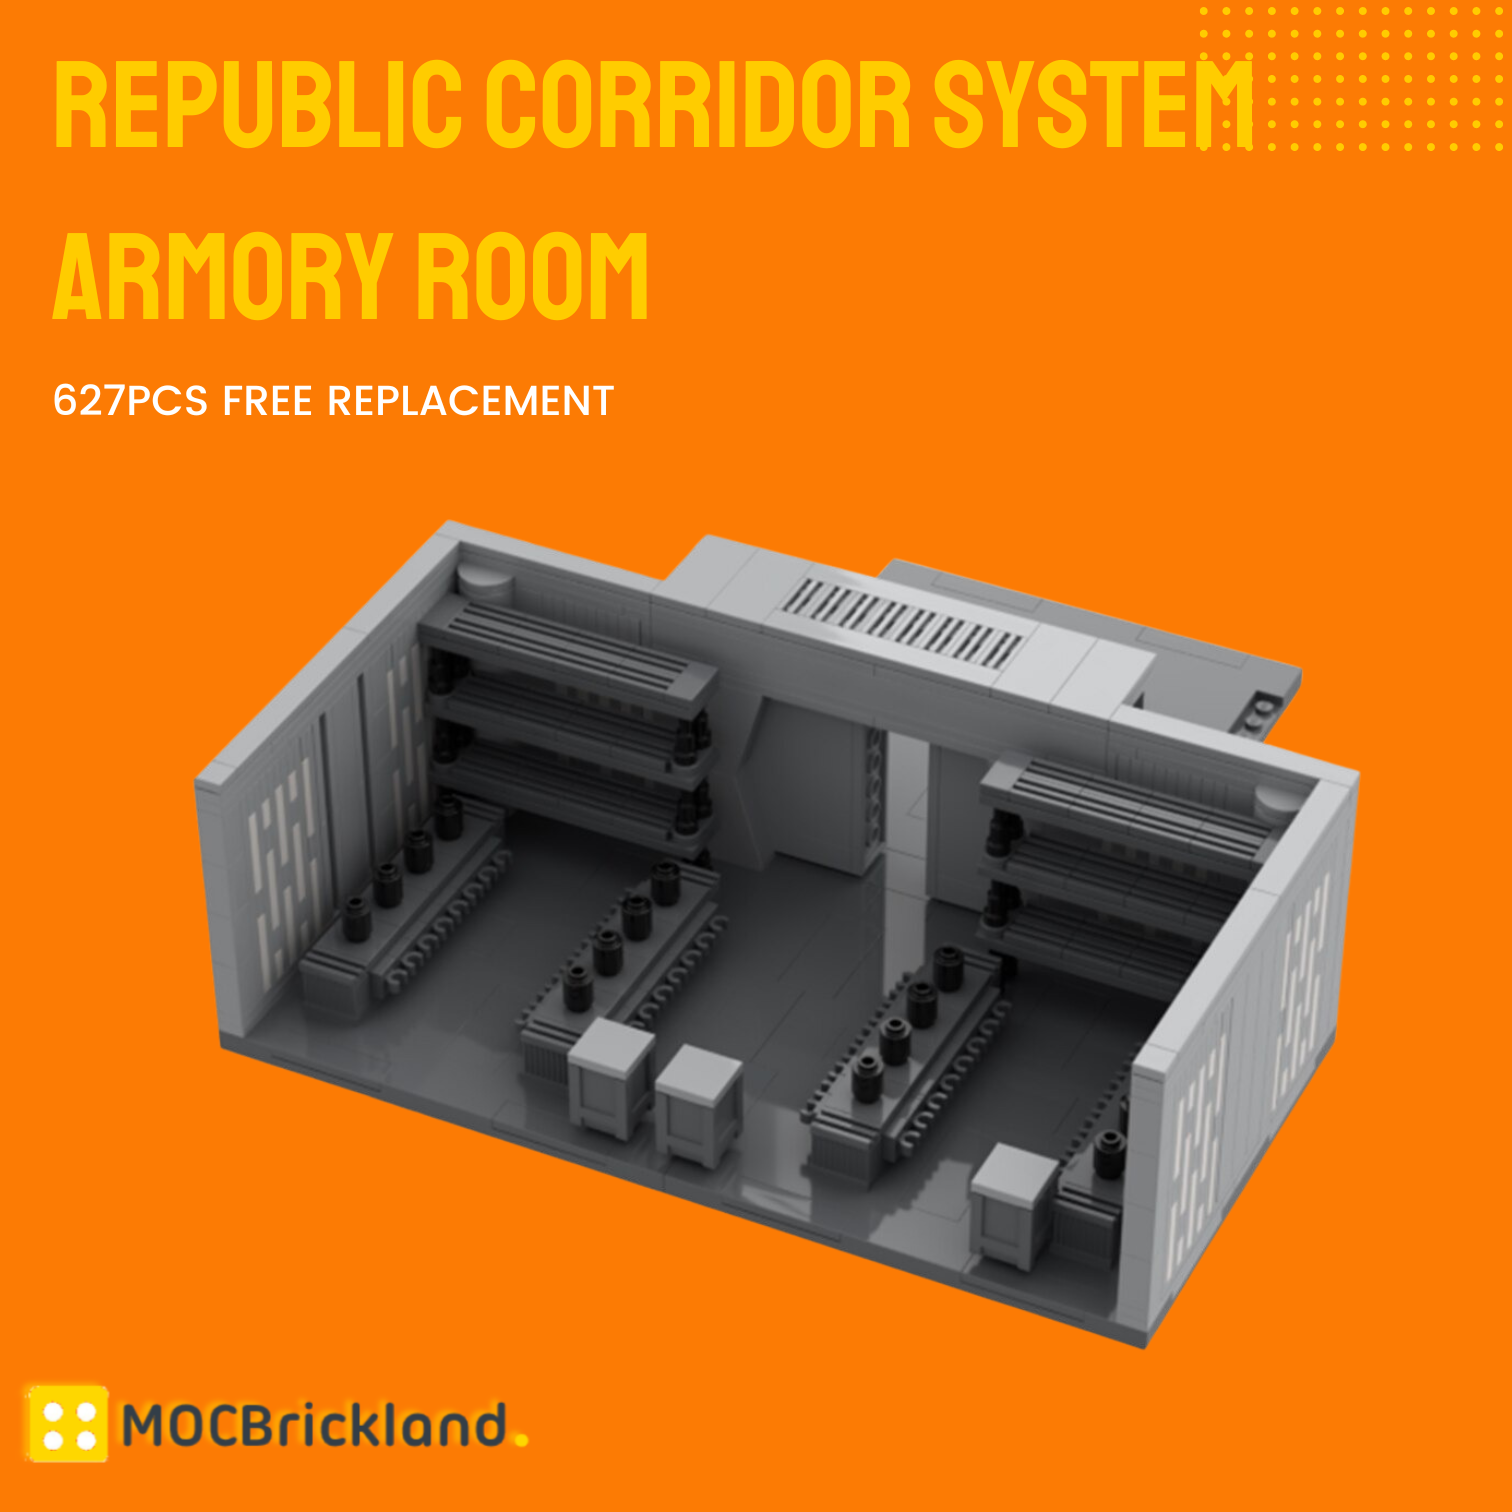 Republic Corridor System Armory Room MOC-96788 Star Wars With 627pcs